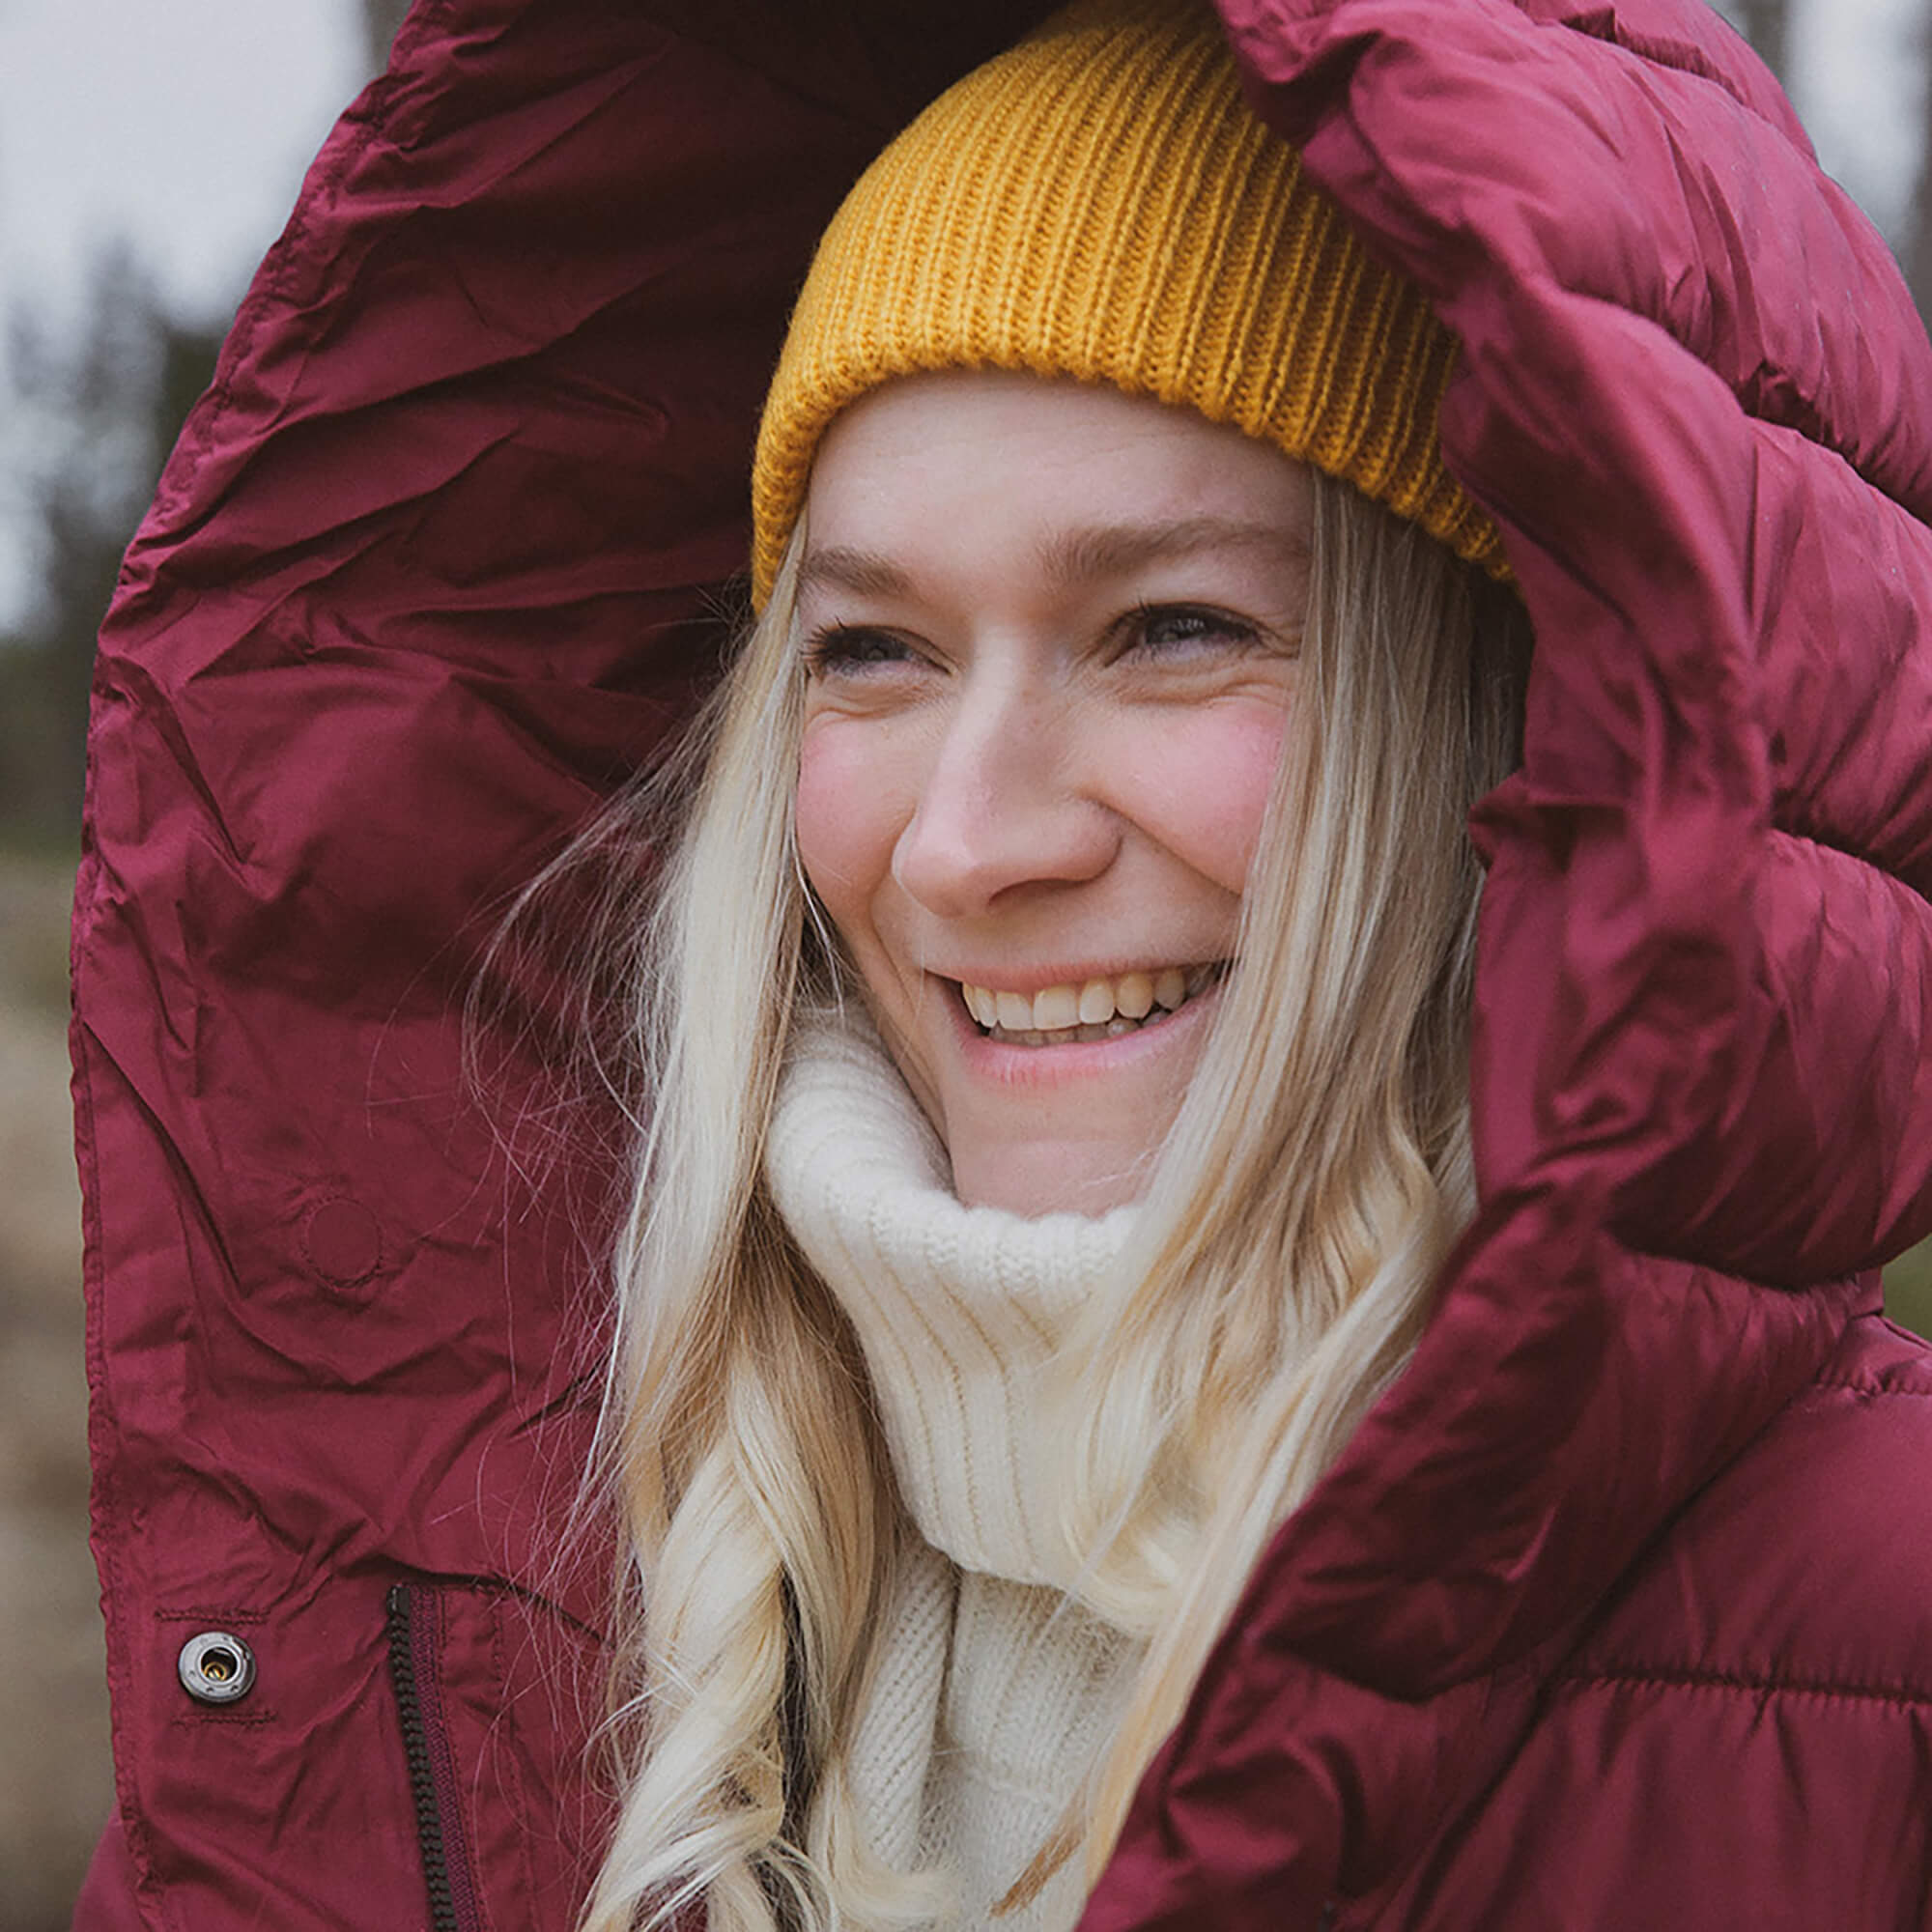 A portrait of photographer Isabella Ståhl in a yellow beanie and red jacked